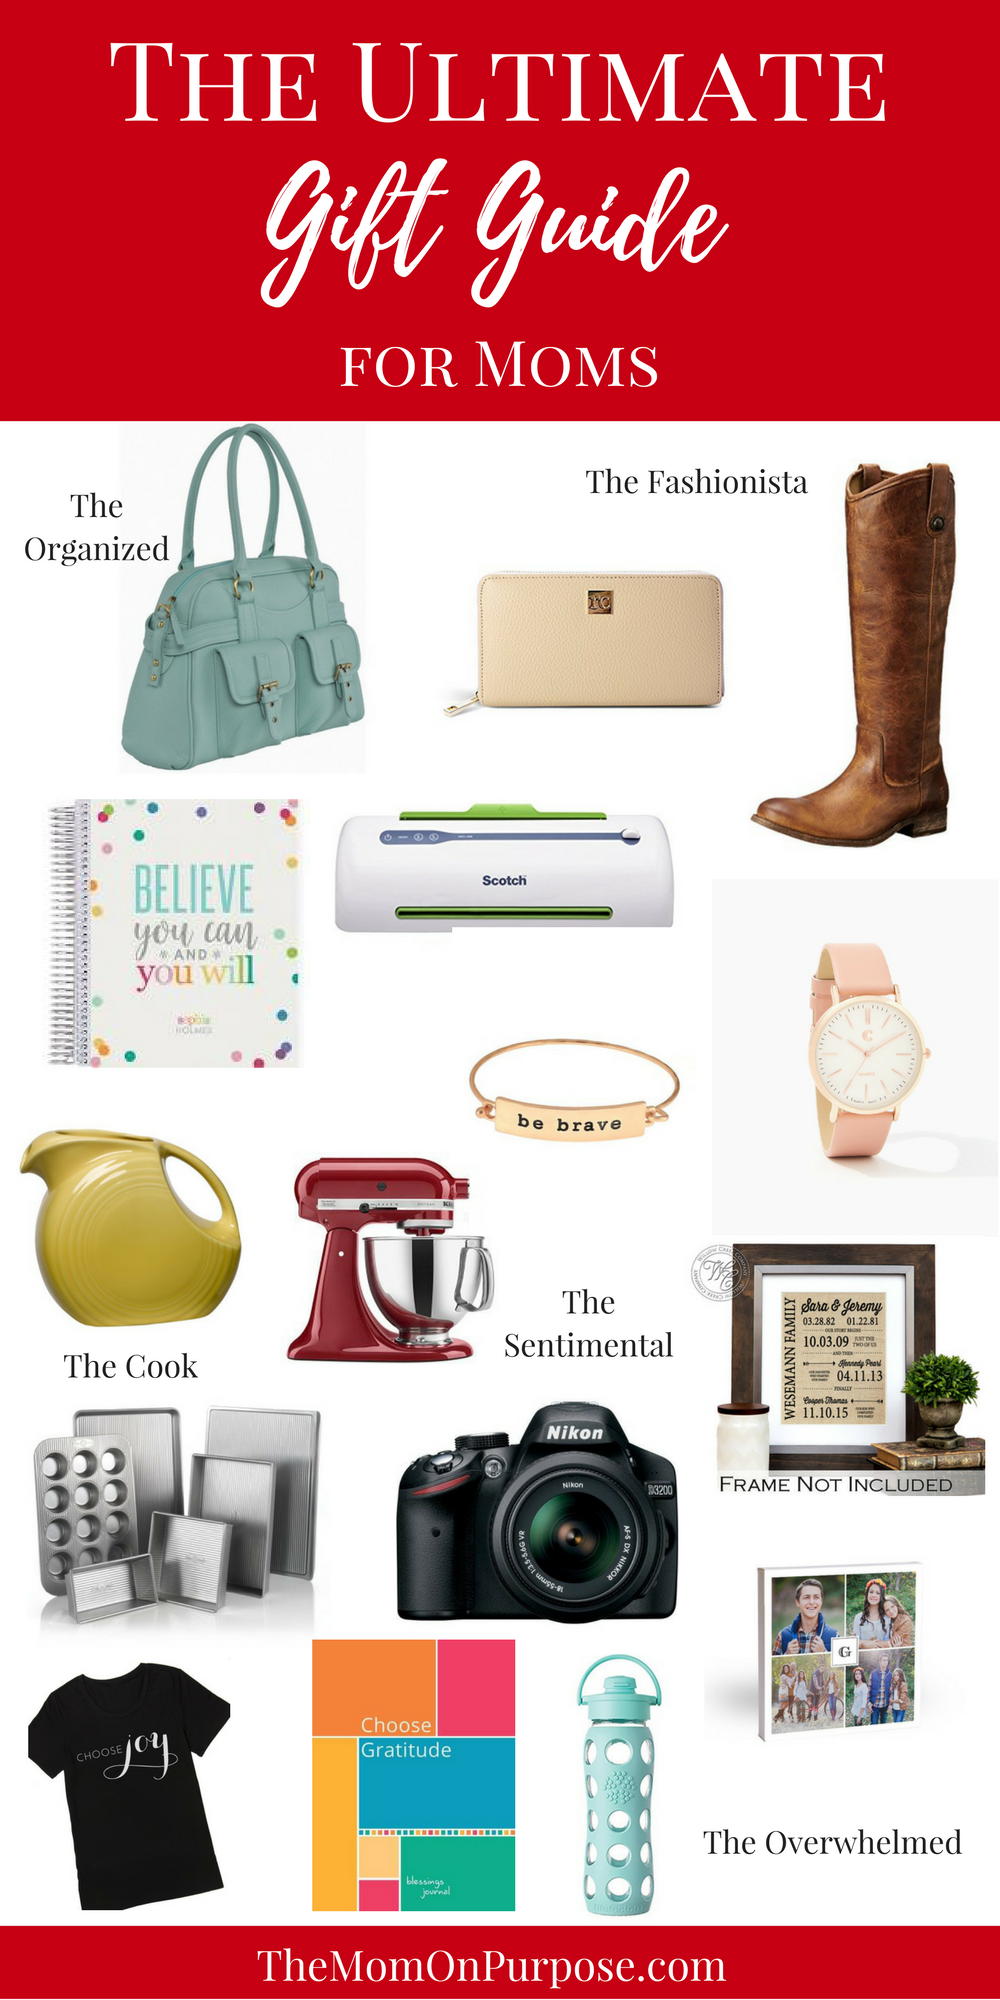 Are you looking for some gift ideas for the moms on your Christmas list? The Ultimate Gift Guide for Moms will give you ideas for all of the different moms you are shopping for!